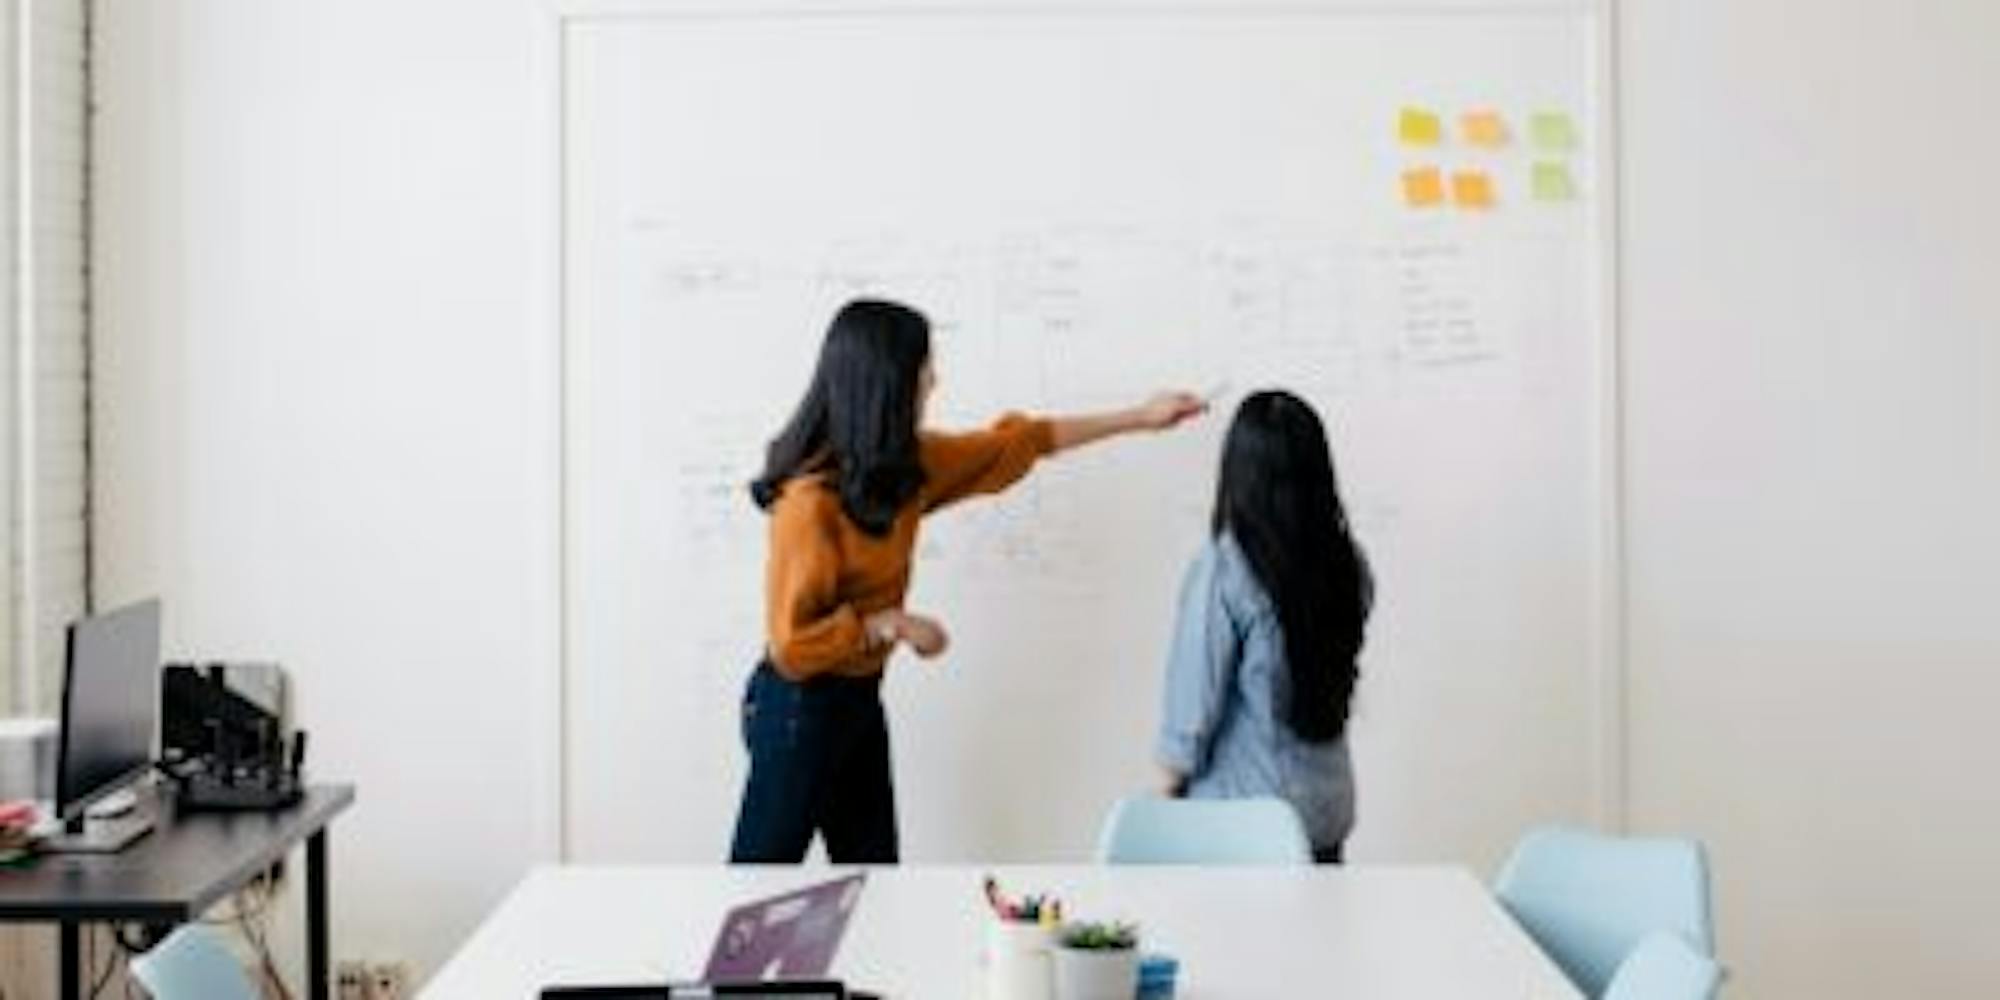 Women in a conference room discussing something on a board